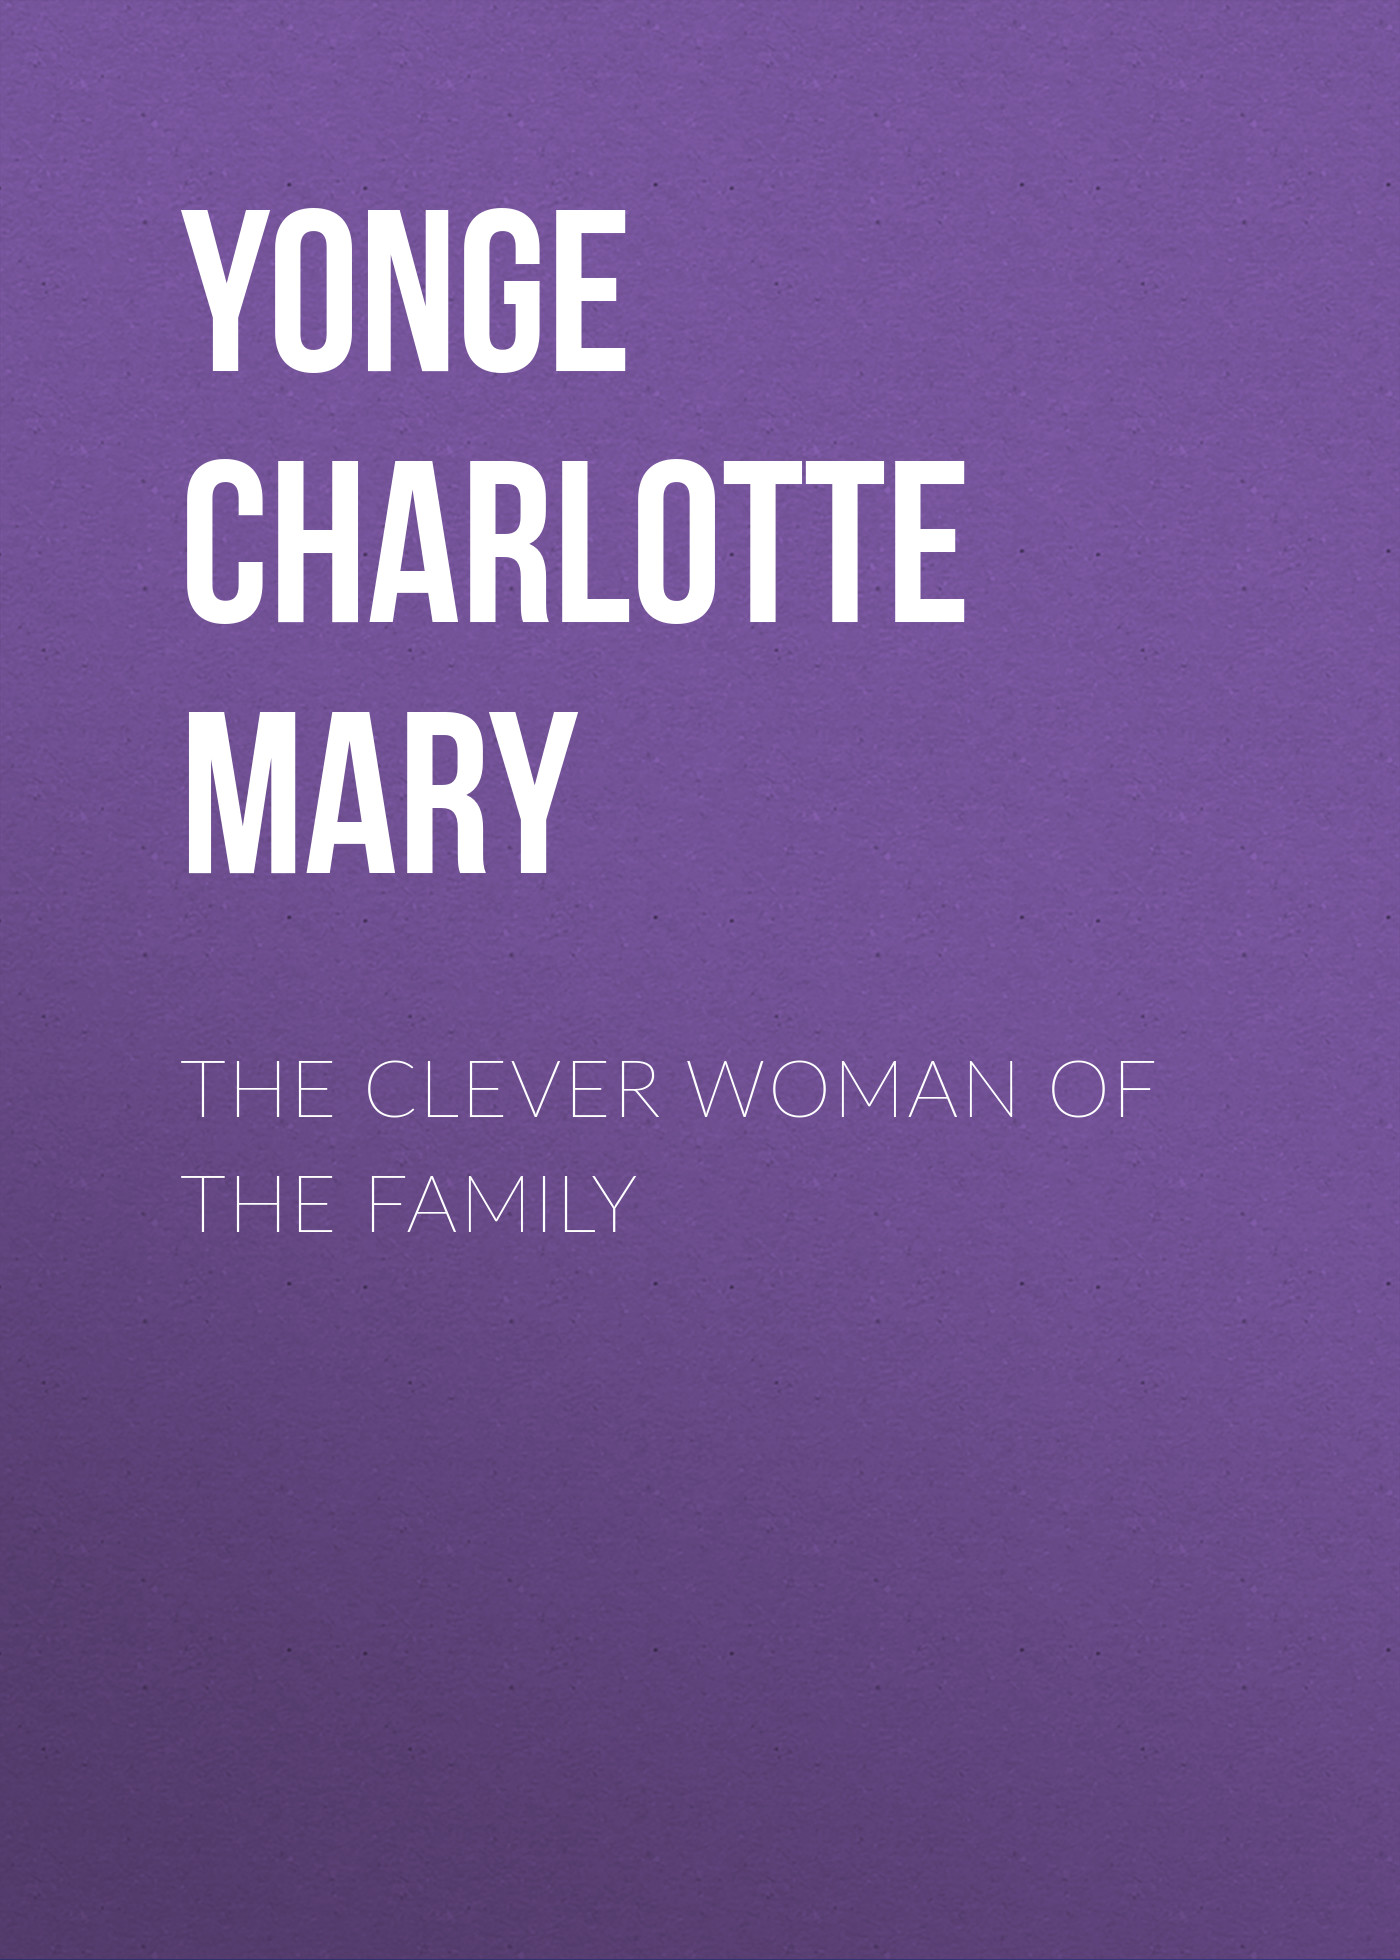 Yonge Charlotte Mary The Clever Woman of the Family